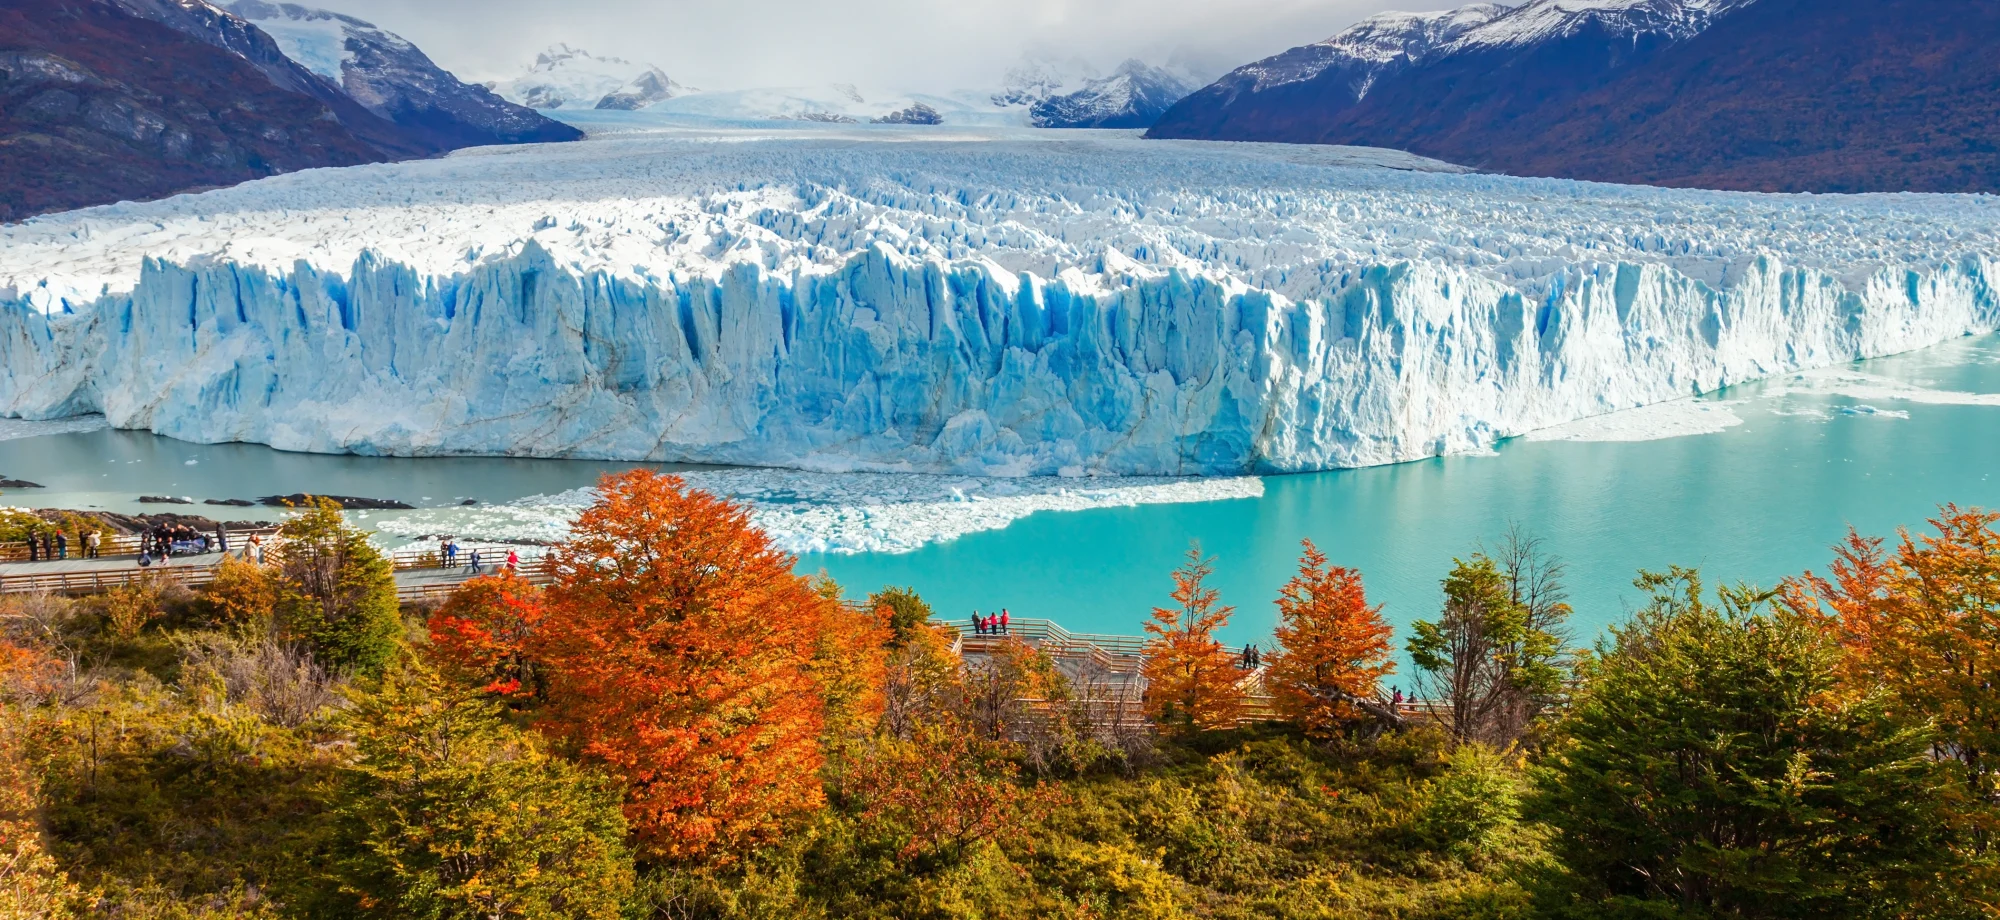 Orange and green trees overlook the turquoise water that fronts the icebergs at Perito Moreno Glacier. 